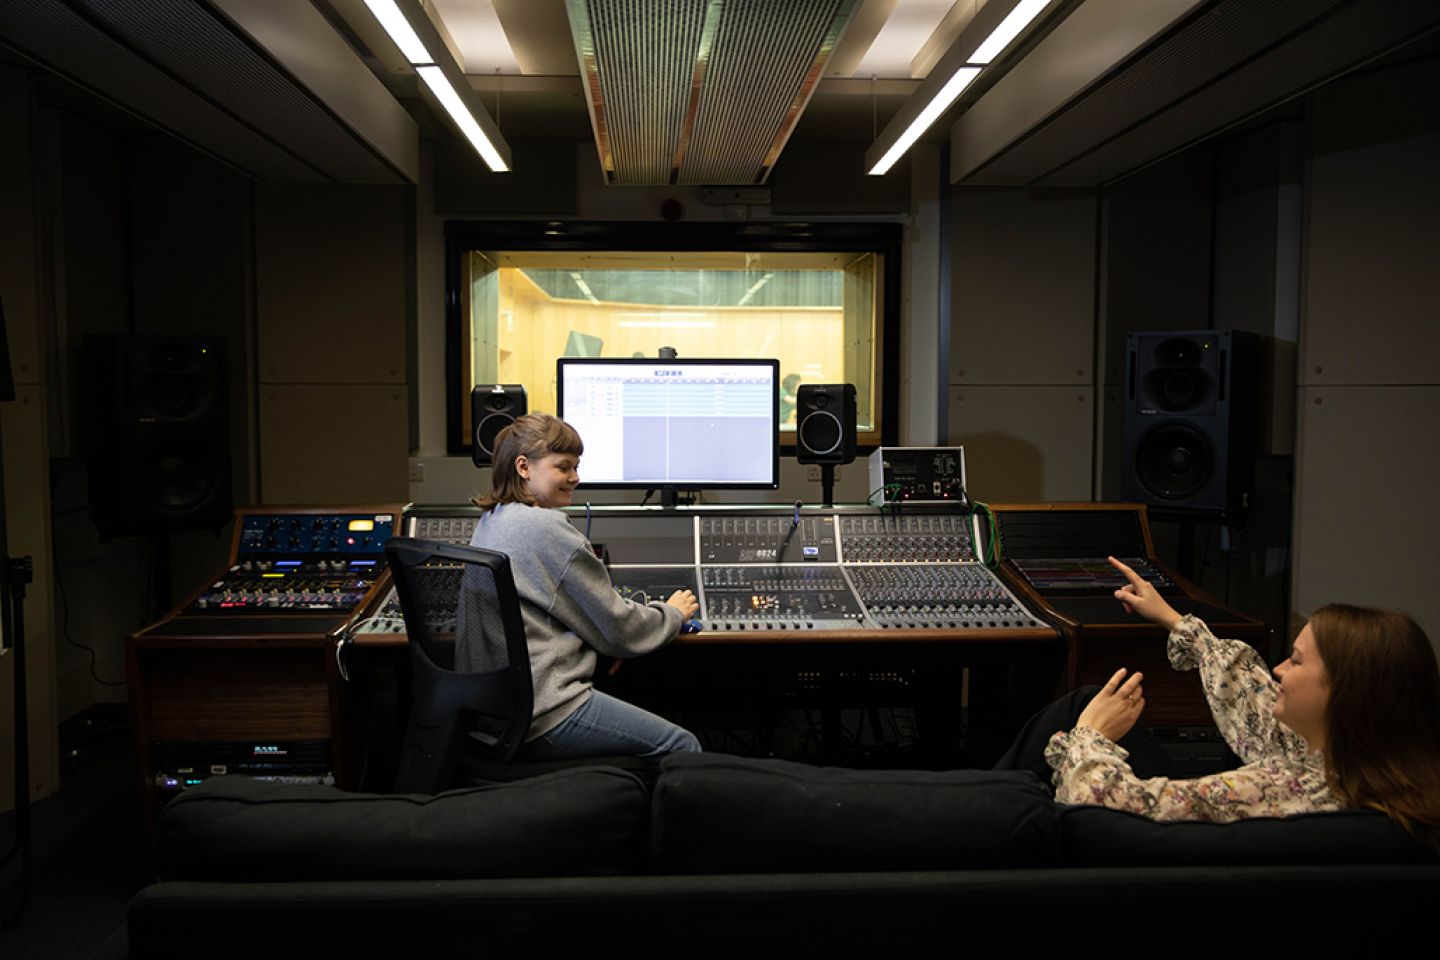 Two female undergraduate students using music studios onlooking the performance space